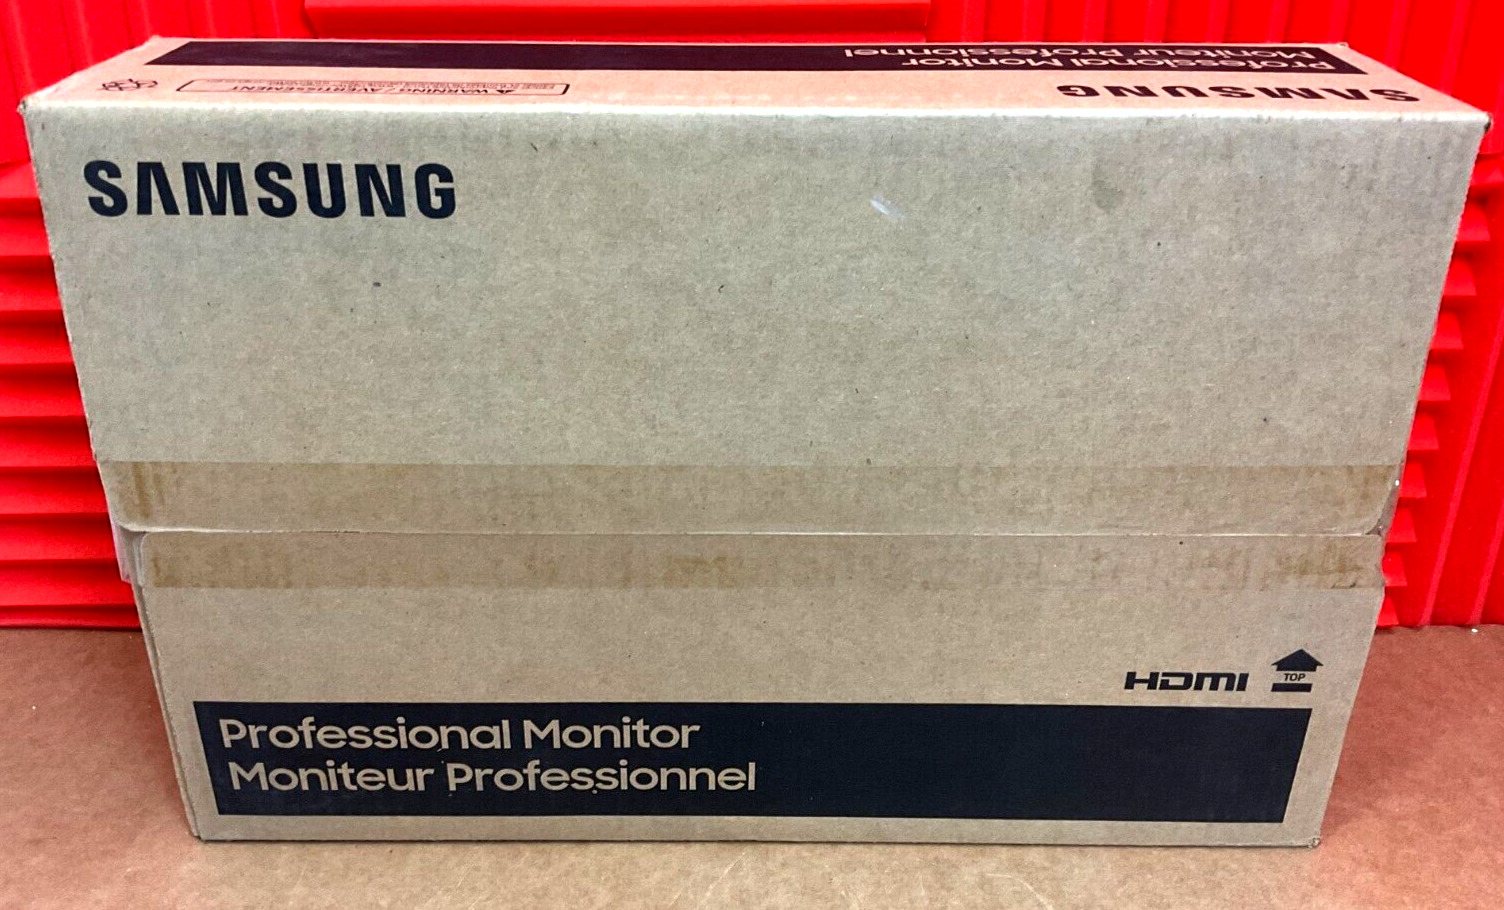 Samsung FT45 22 LED LCD Display 1080p F22T454FQN ✅❤️️✅❤️️ New! SEALED!. Available Now for 119.99